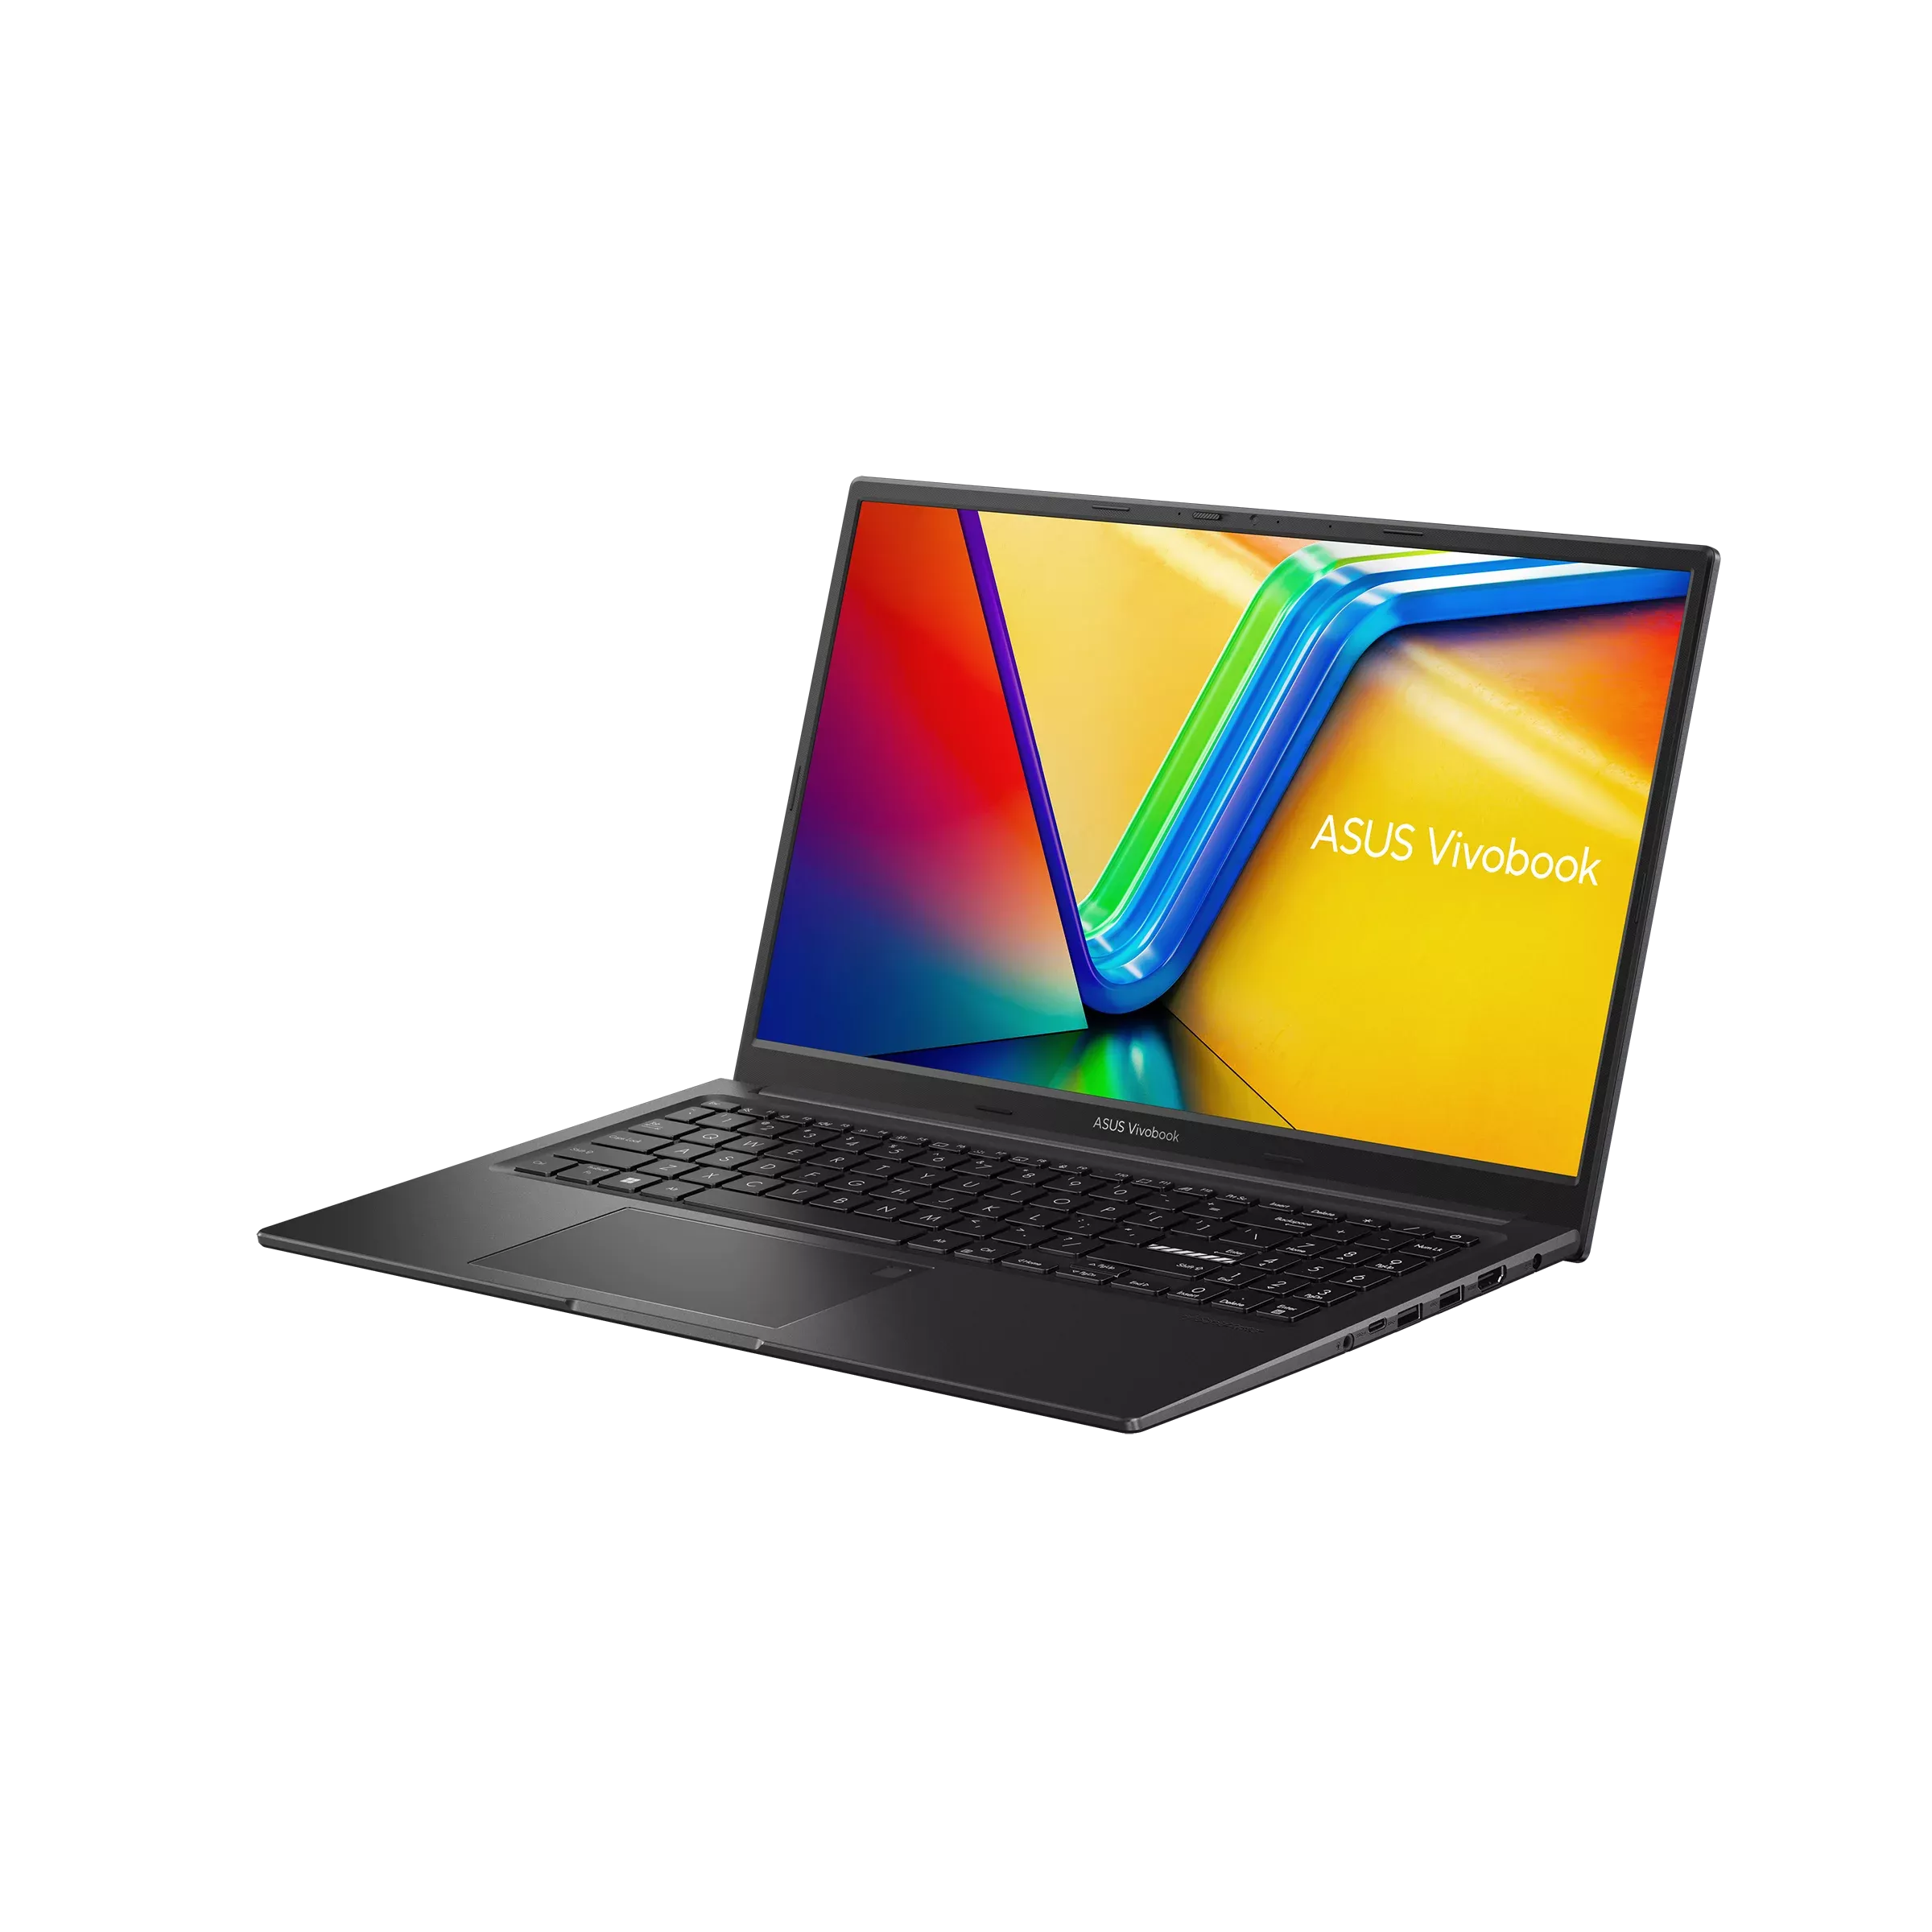 Asus Zenbook 15 OLED 2023 Price in Nepal, Specifications, More!